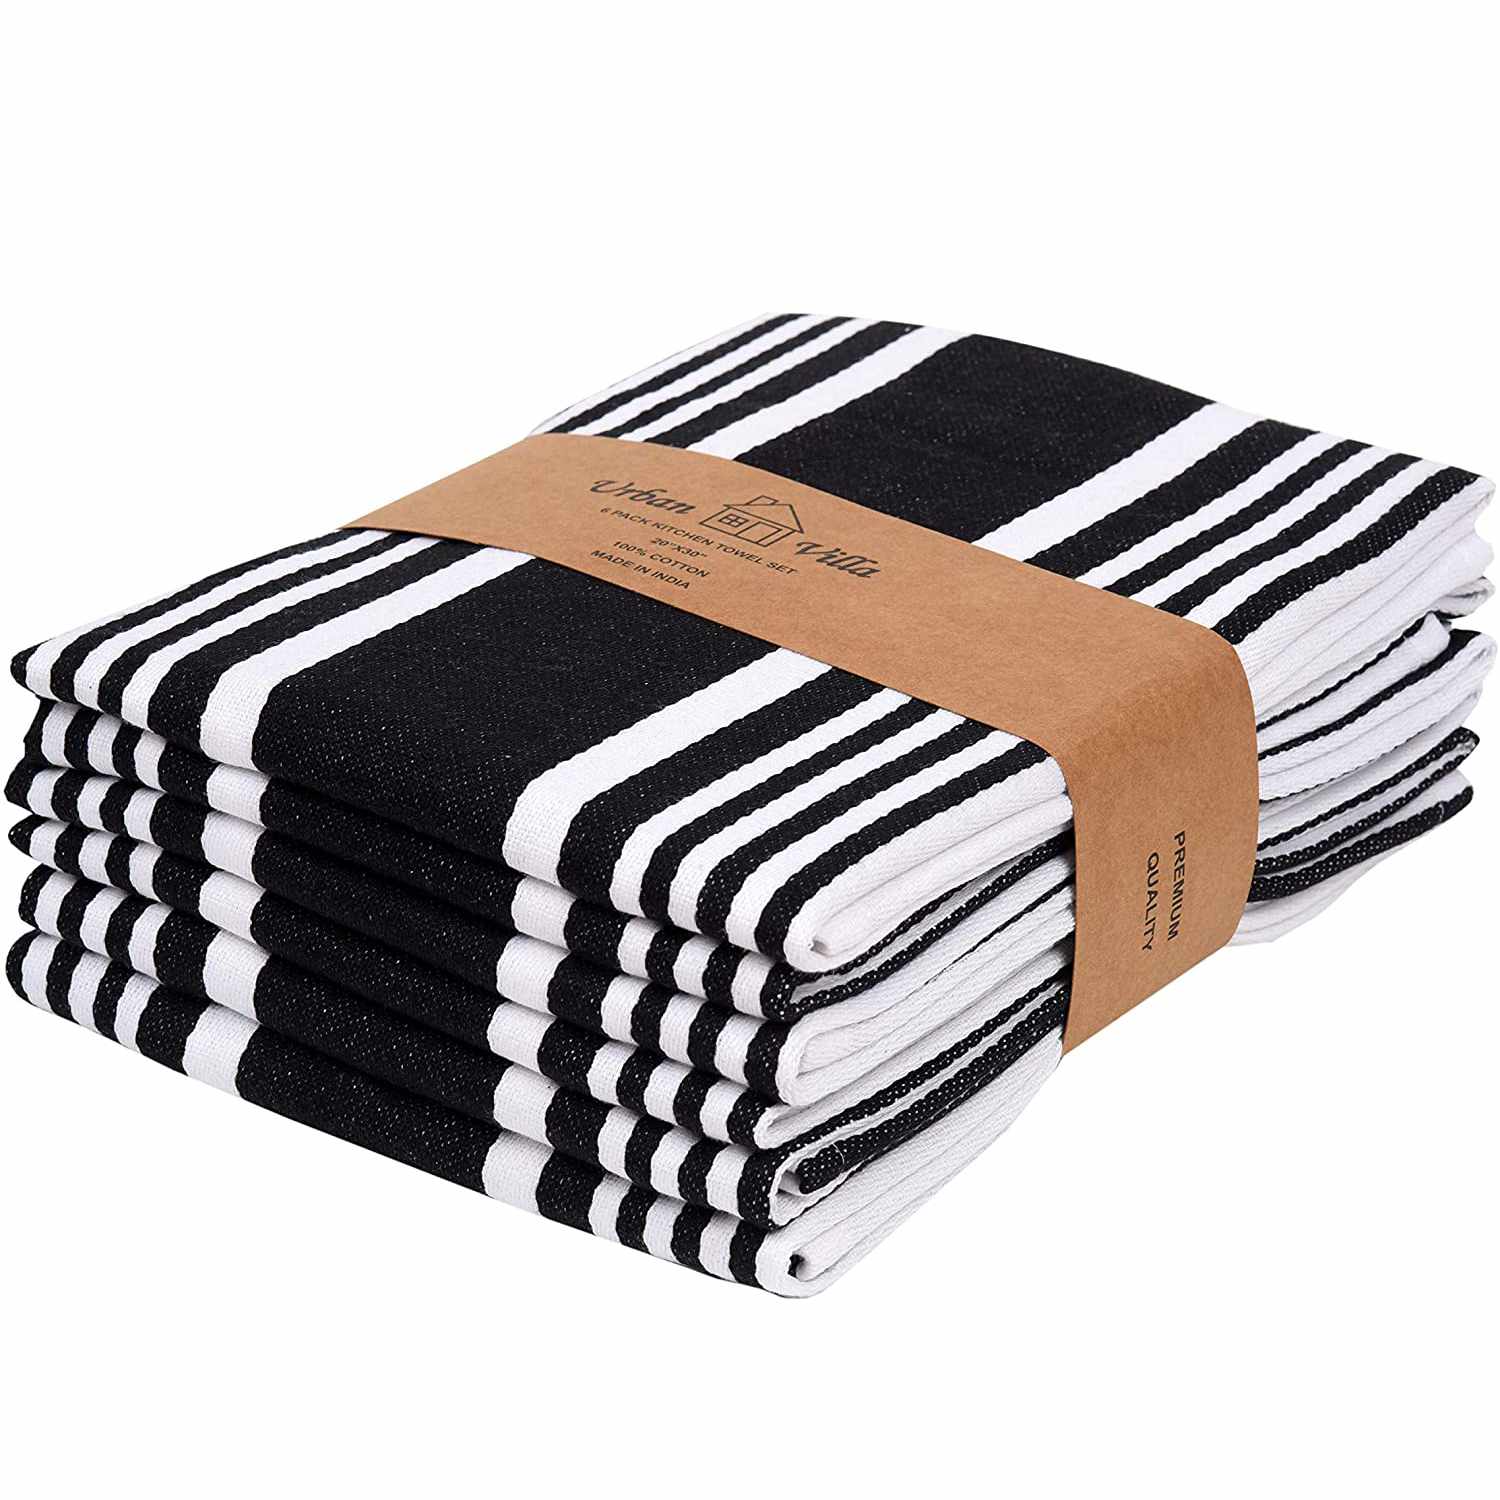 Premium Quality Multi-Color Highly Absorbent Bar Towels & Tea Towels - Urban Villa Kitchen Towels Set of 6 Solid Satin Weave Ultra Soft 100% Cotton Dish Towels, Size: 20X30 Inch